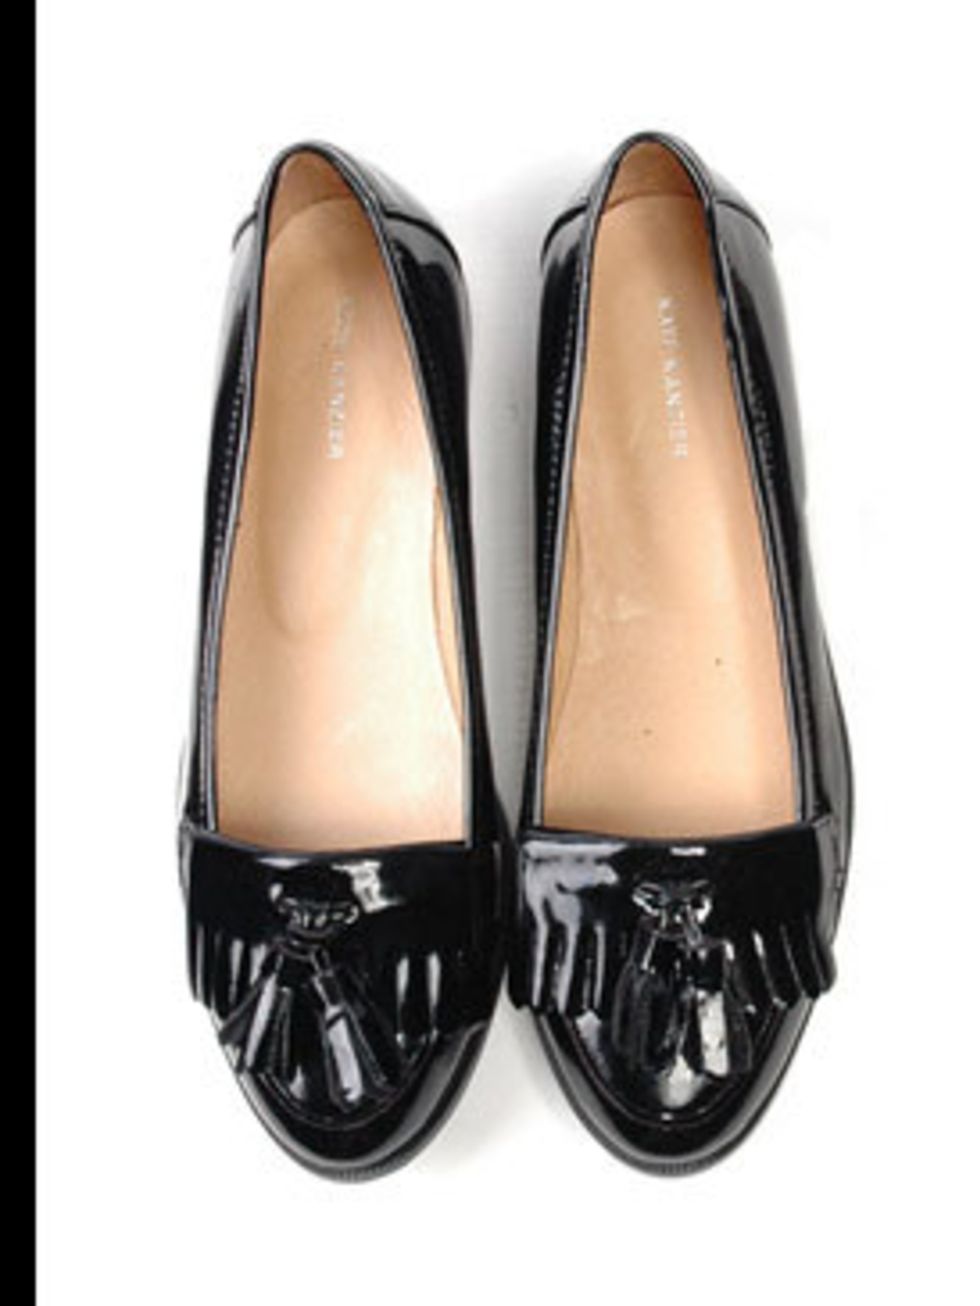 <p>Loafers, £35 by <a href="http://www.katekanzier.com/moreinfo.asp?product_id=1250&amp;pid=417">Kate Kanzier</a></p>